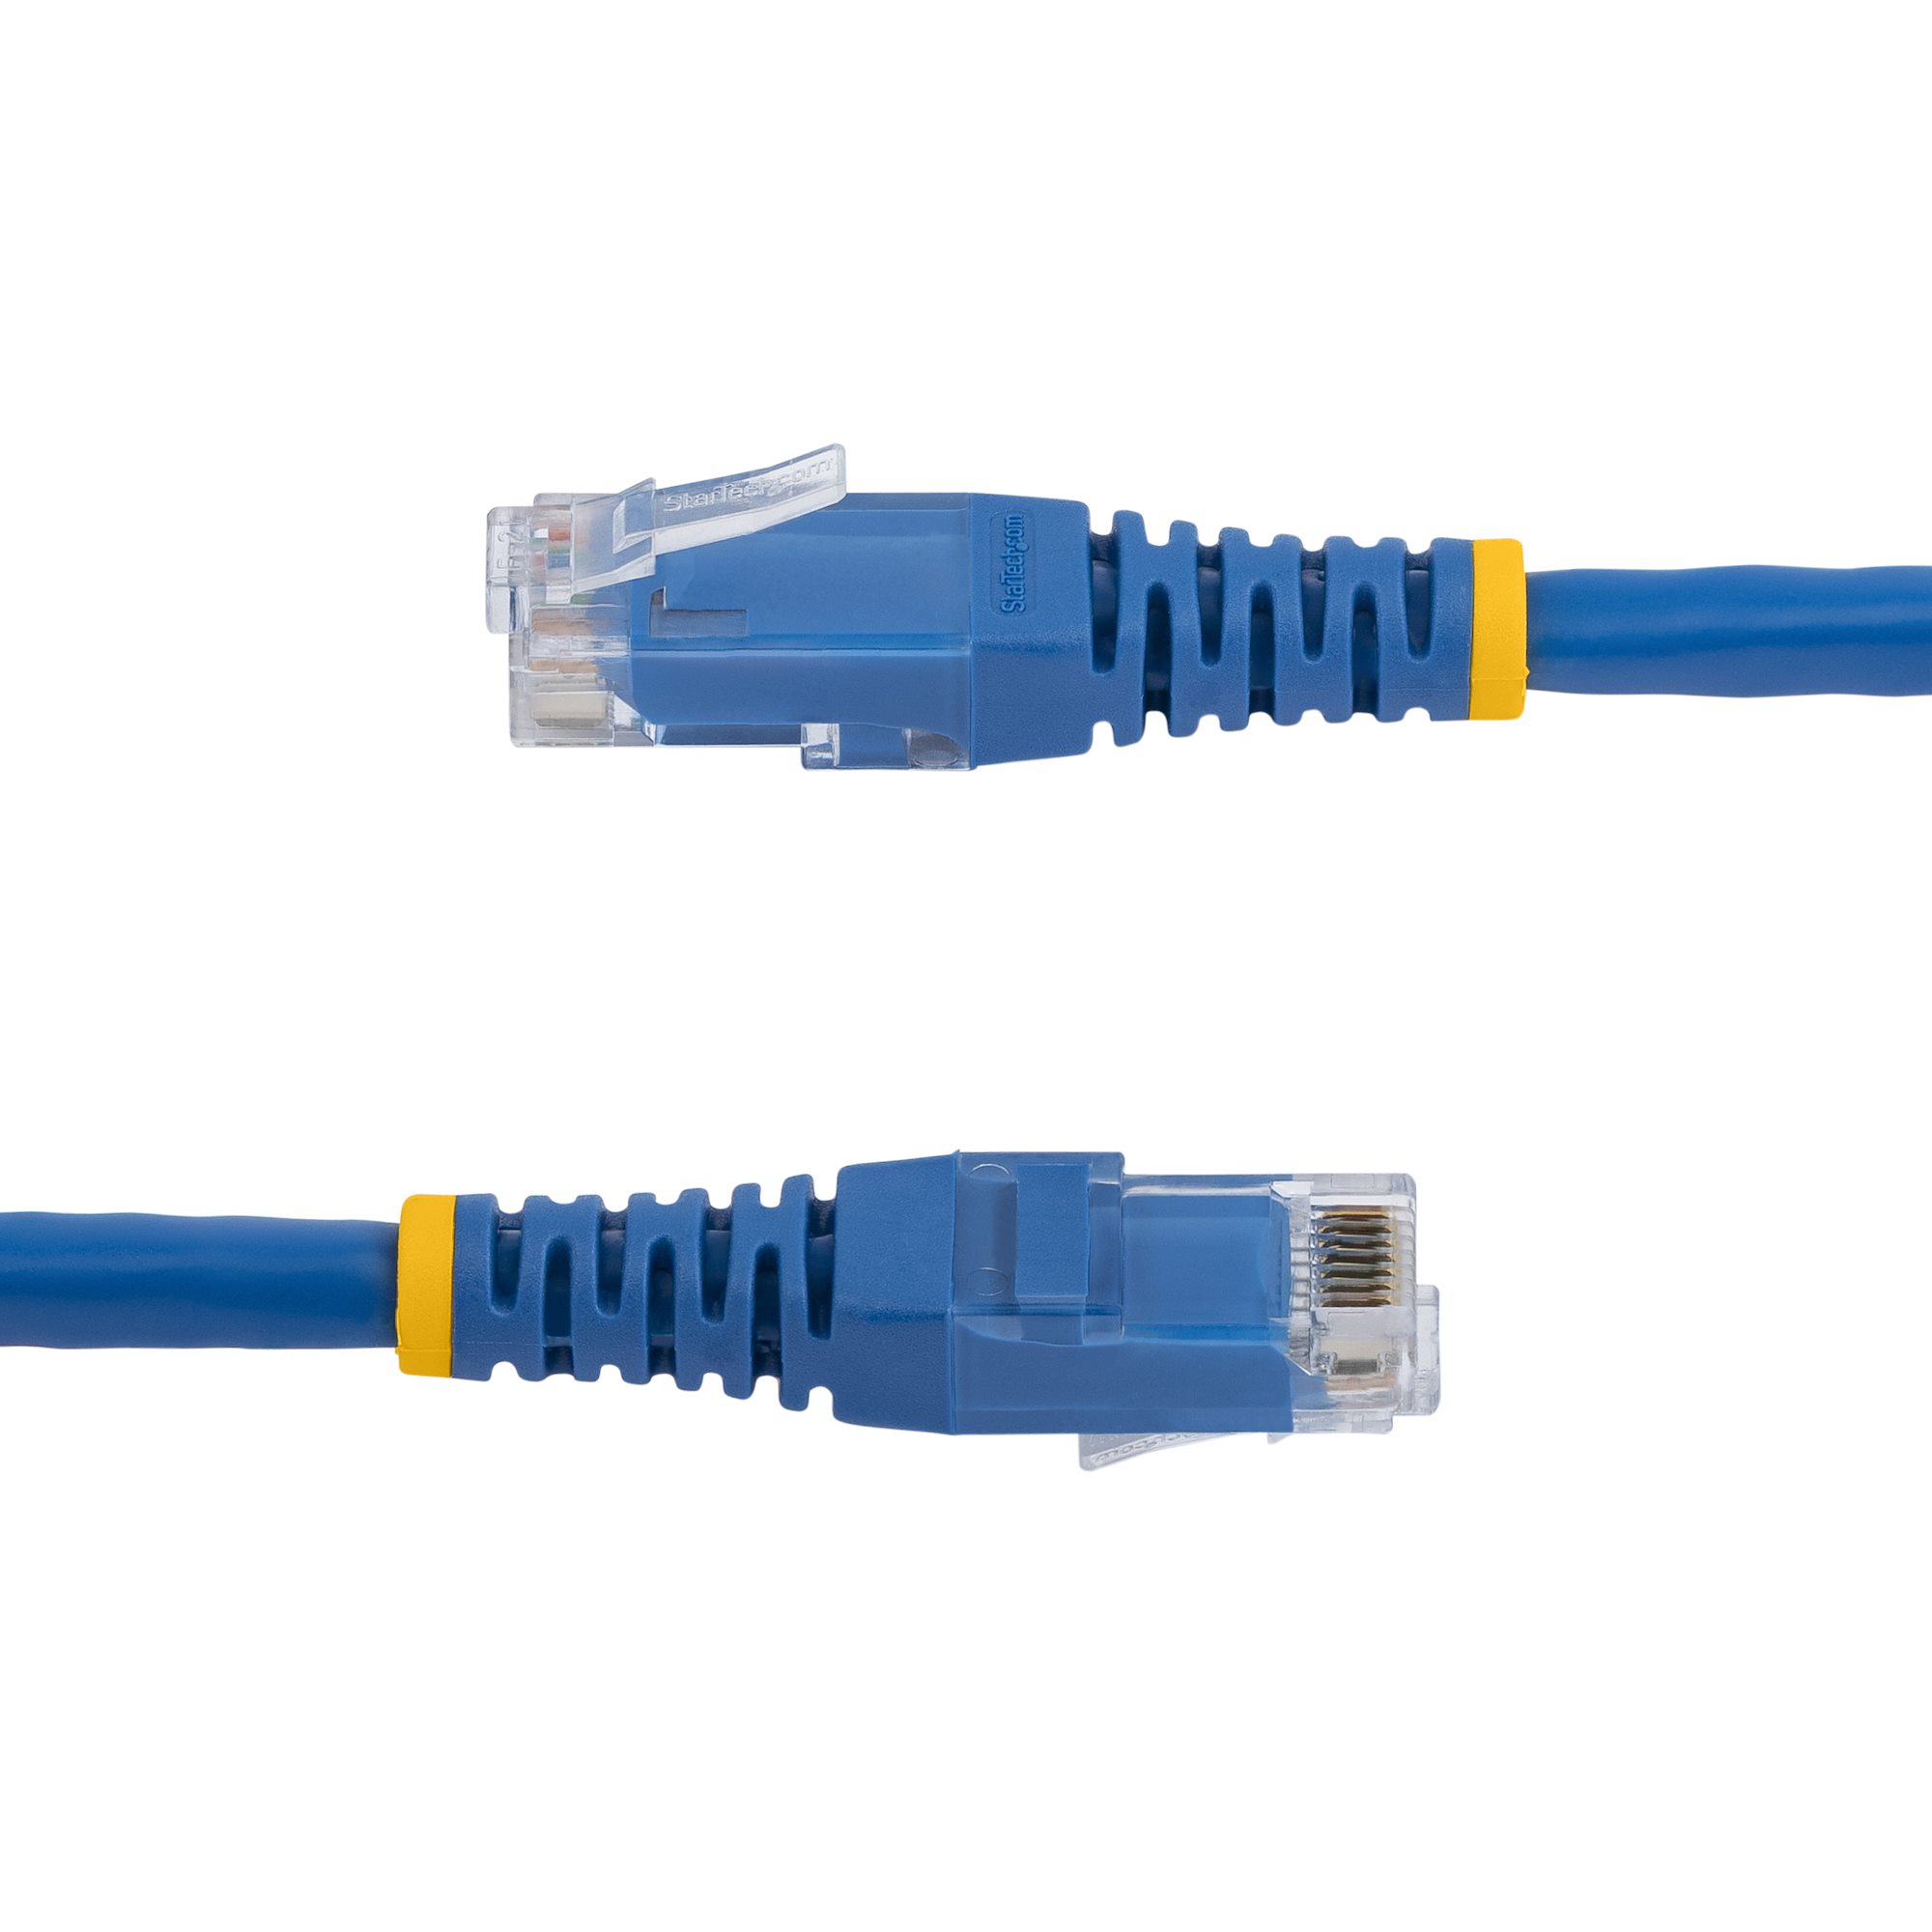 BJC Certified Cat 6A Patch Cable, Assembled in USA, with Test Report (Blue,  25 Foot)